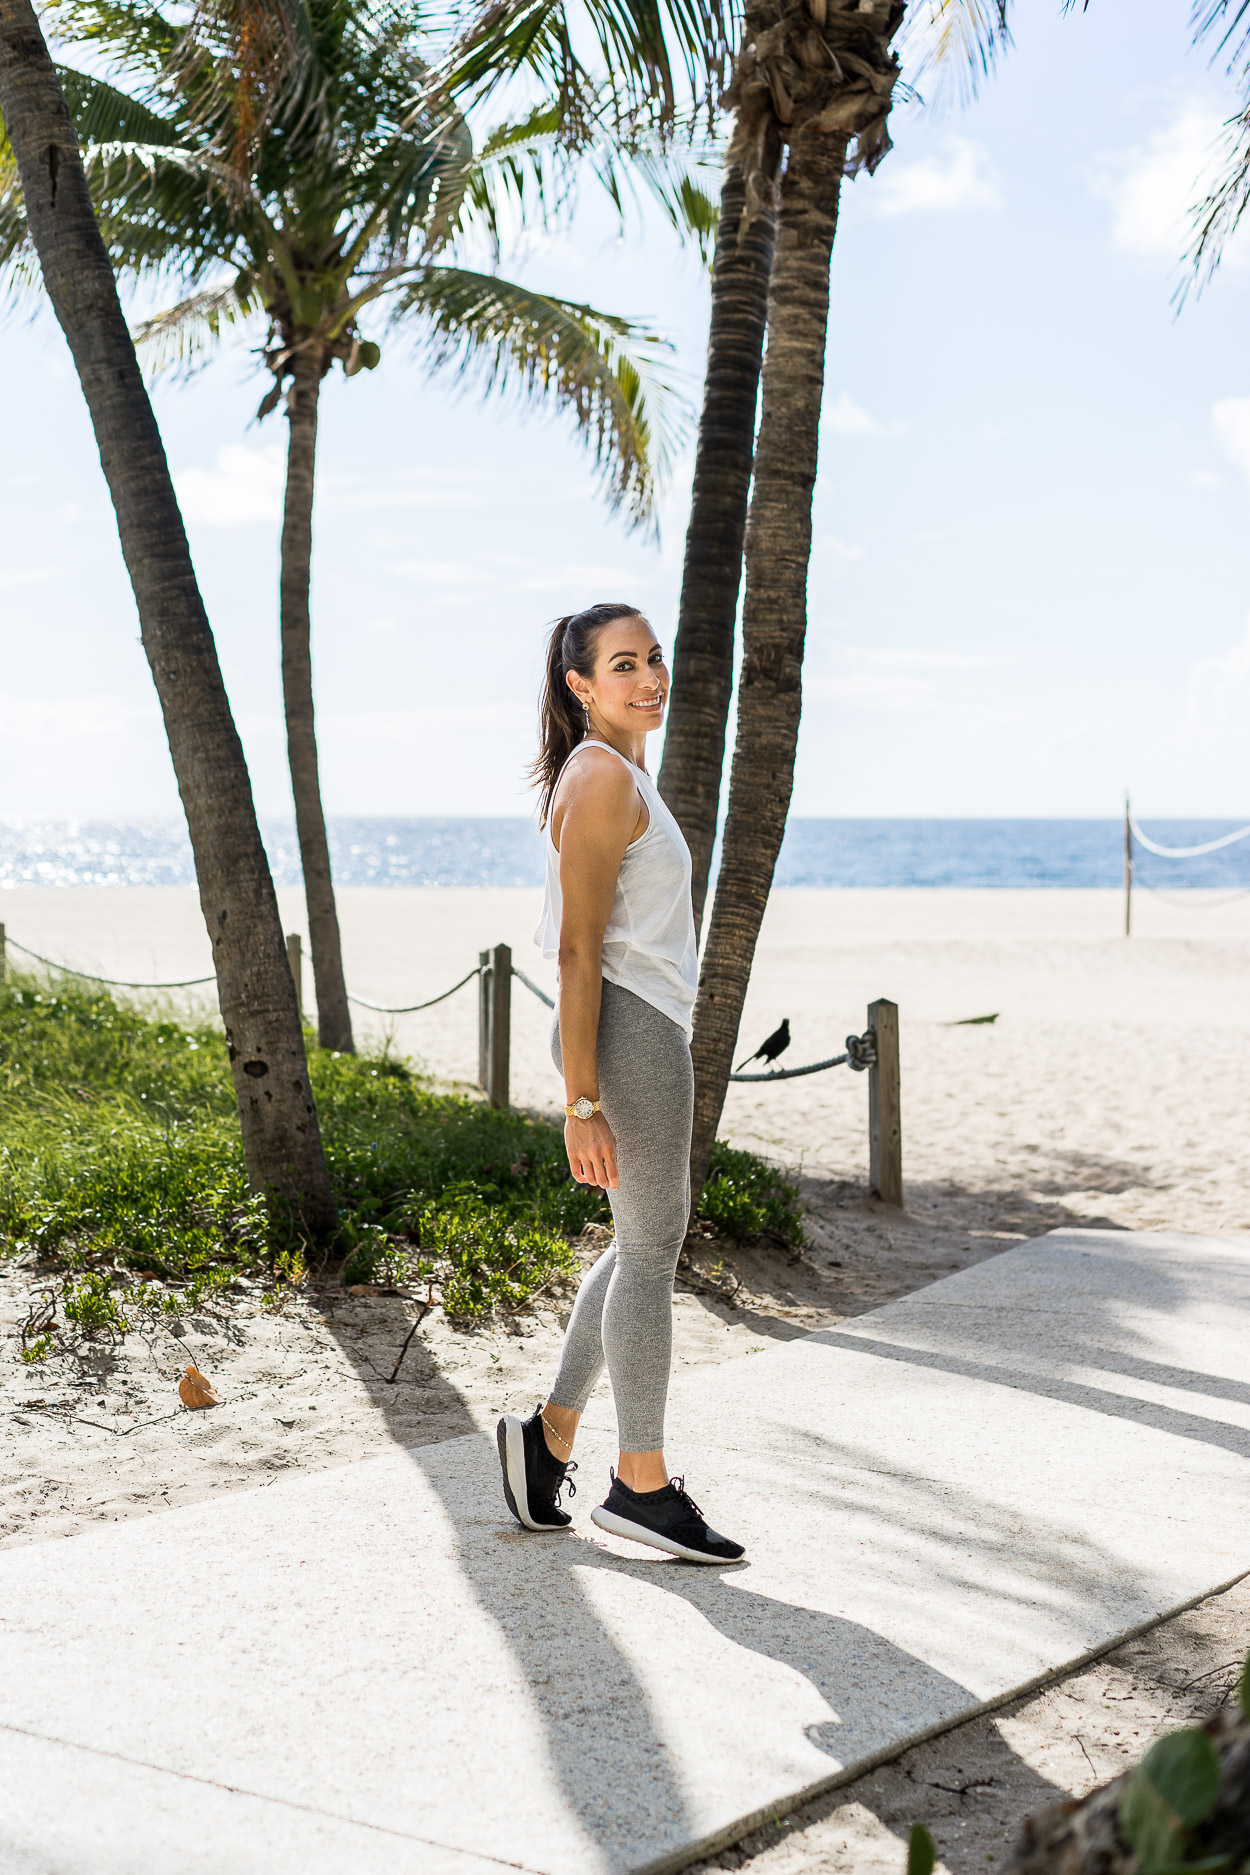 Old Navy activewear is chic for Summer workouts